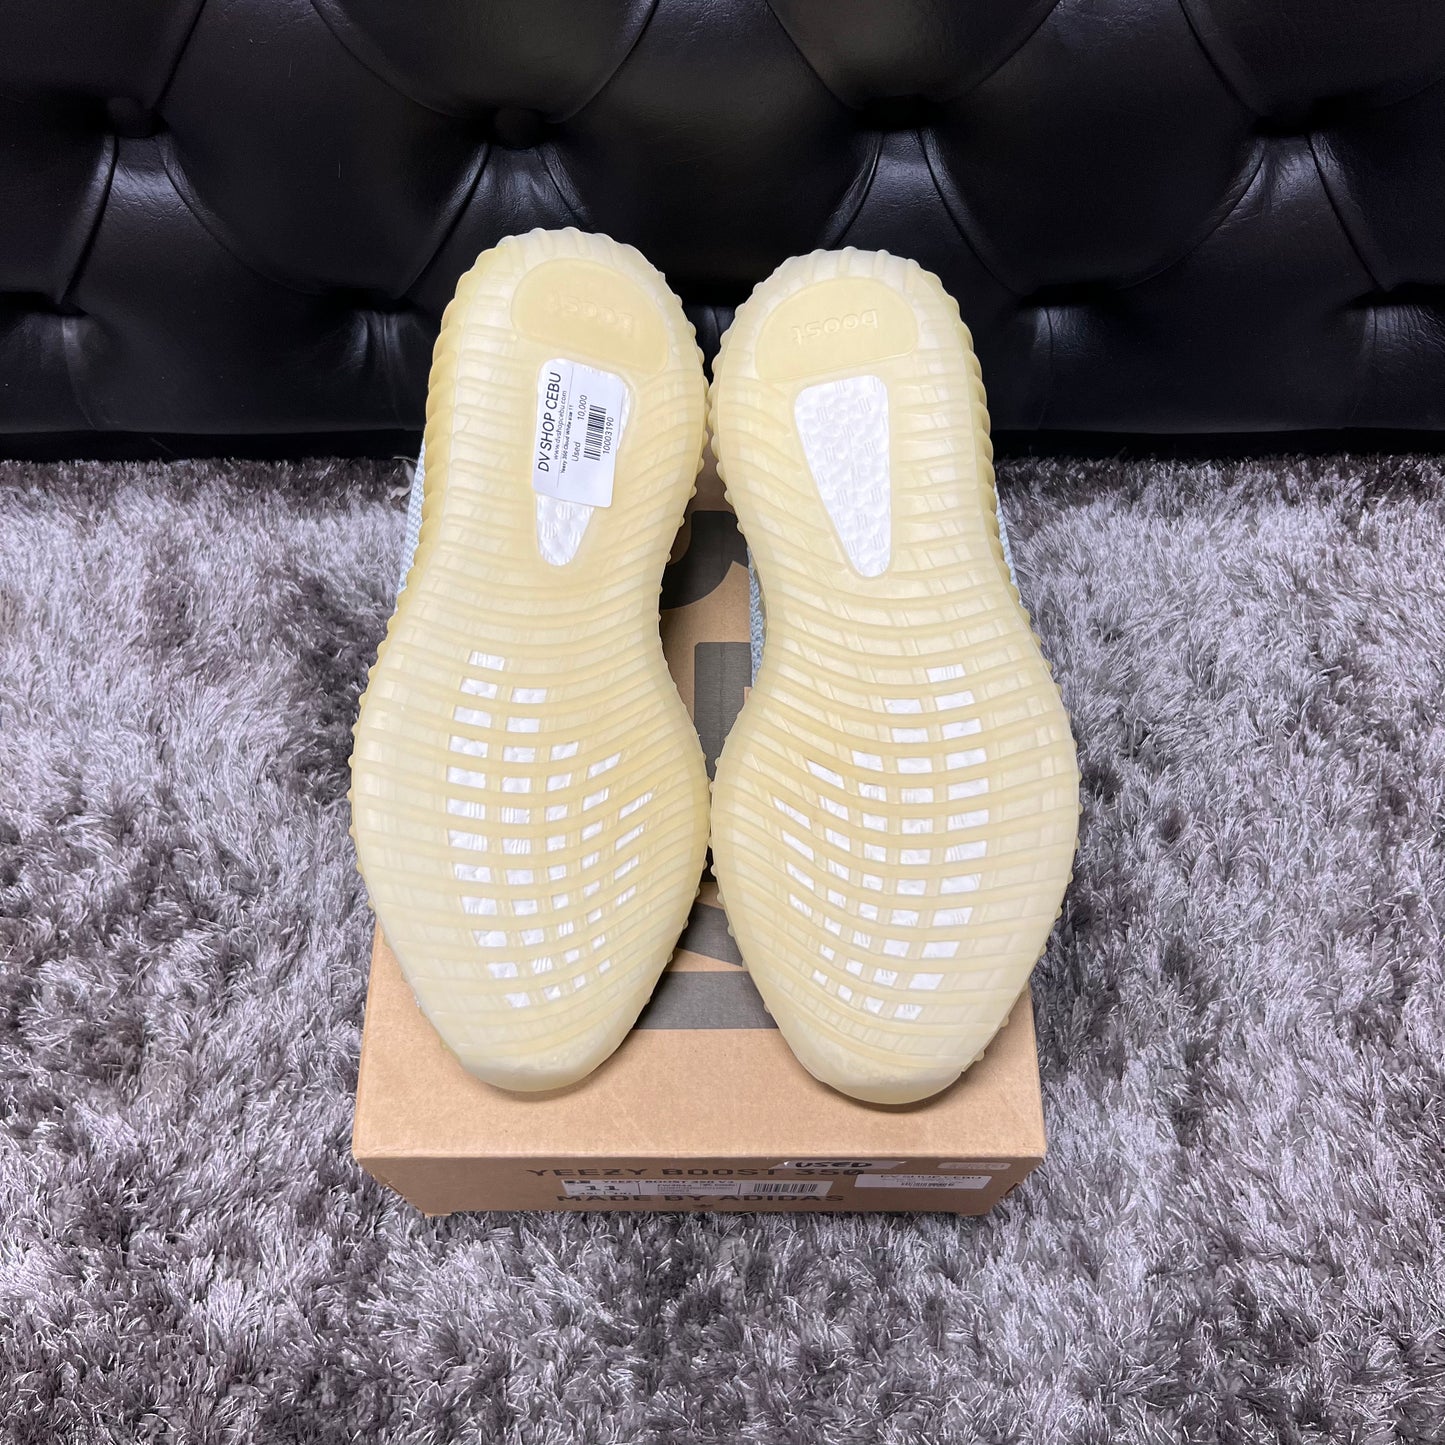 Yeezy 350 Cloud White size 11 used